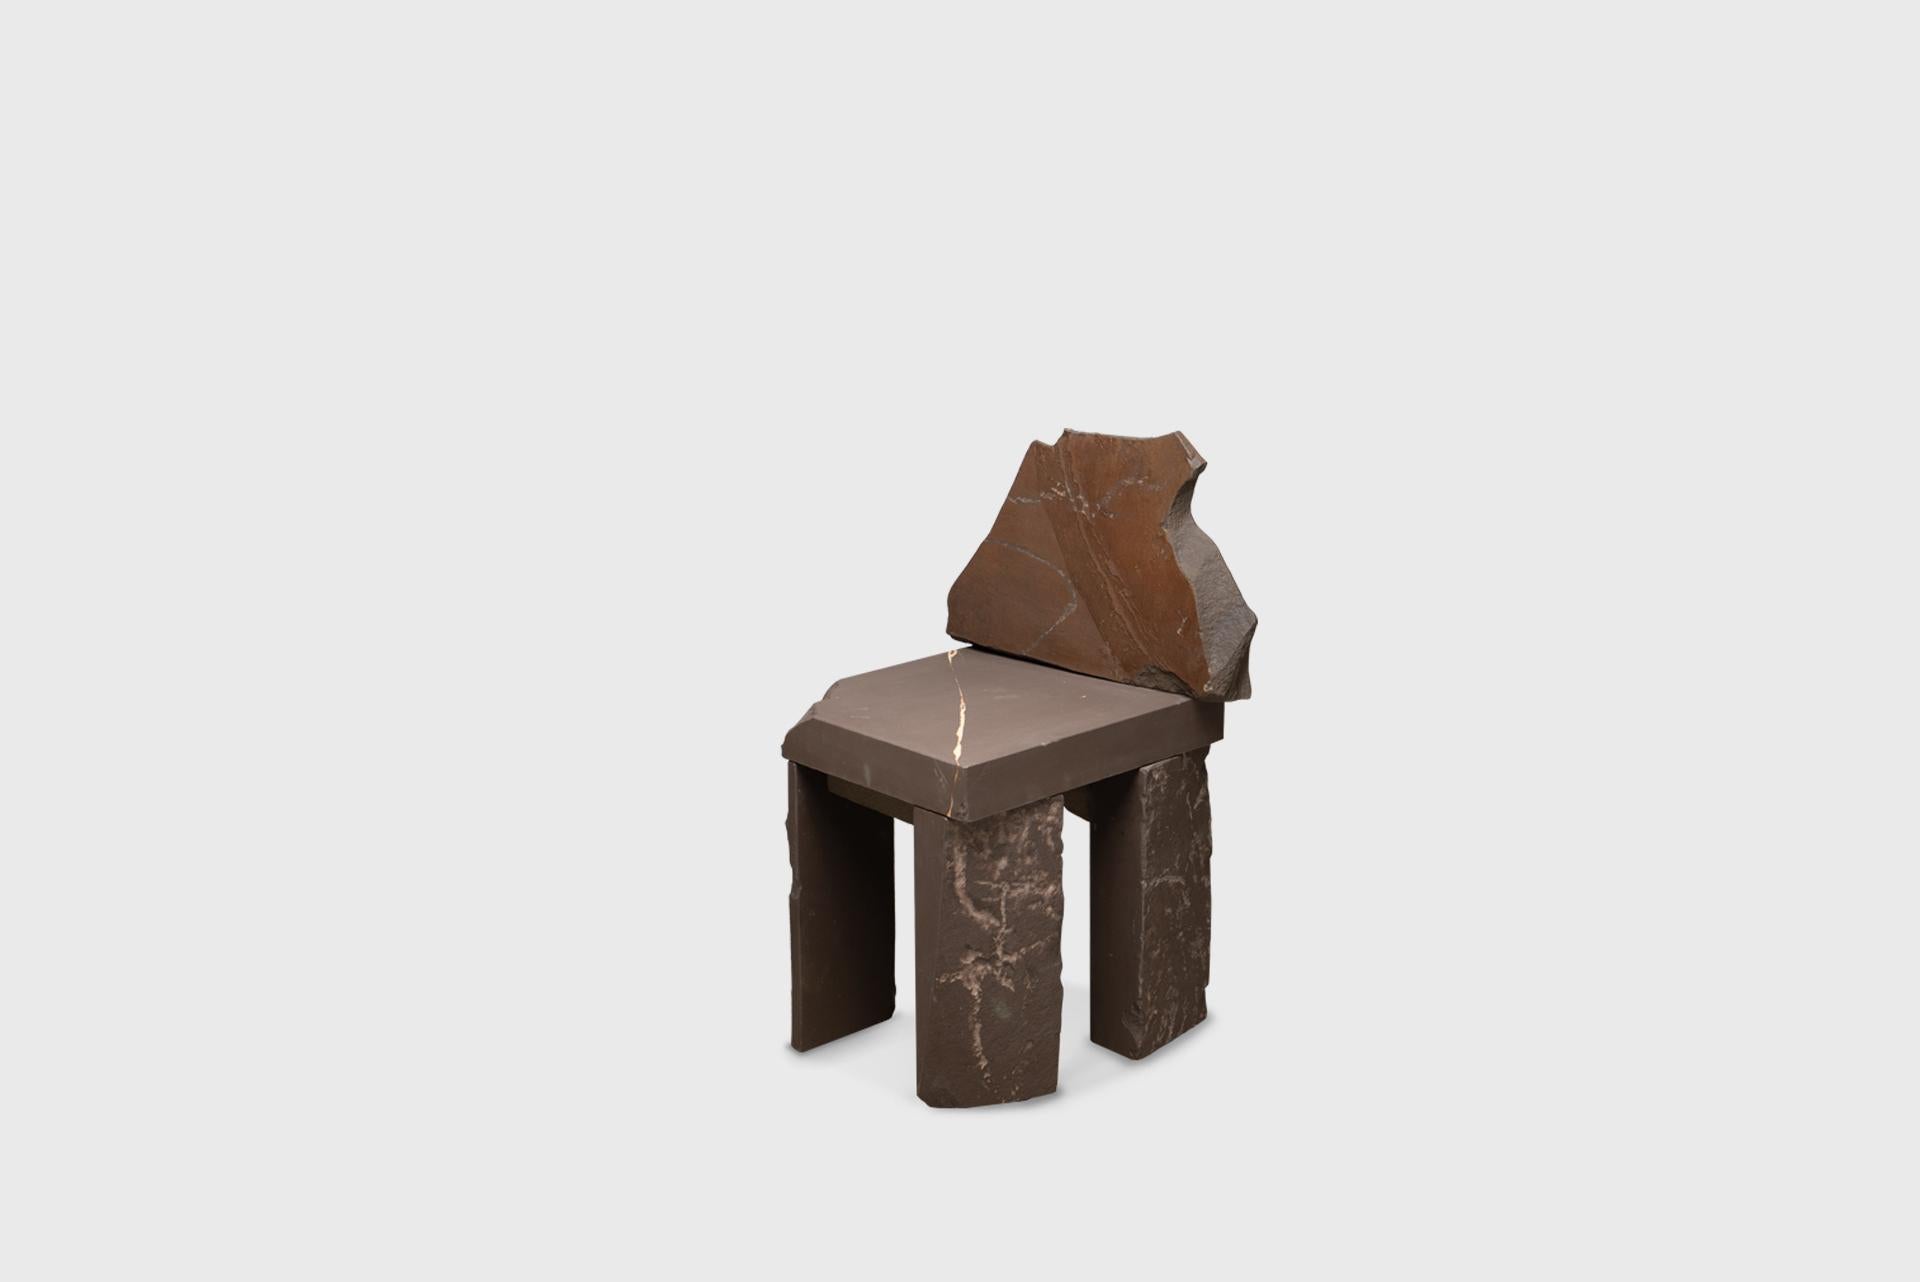 Contemporary Natural Chair 09, Graywacke Offcut Gray Stone, Carsten in der Elst For Sale 1